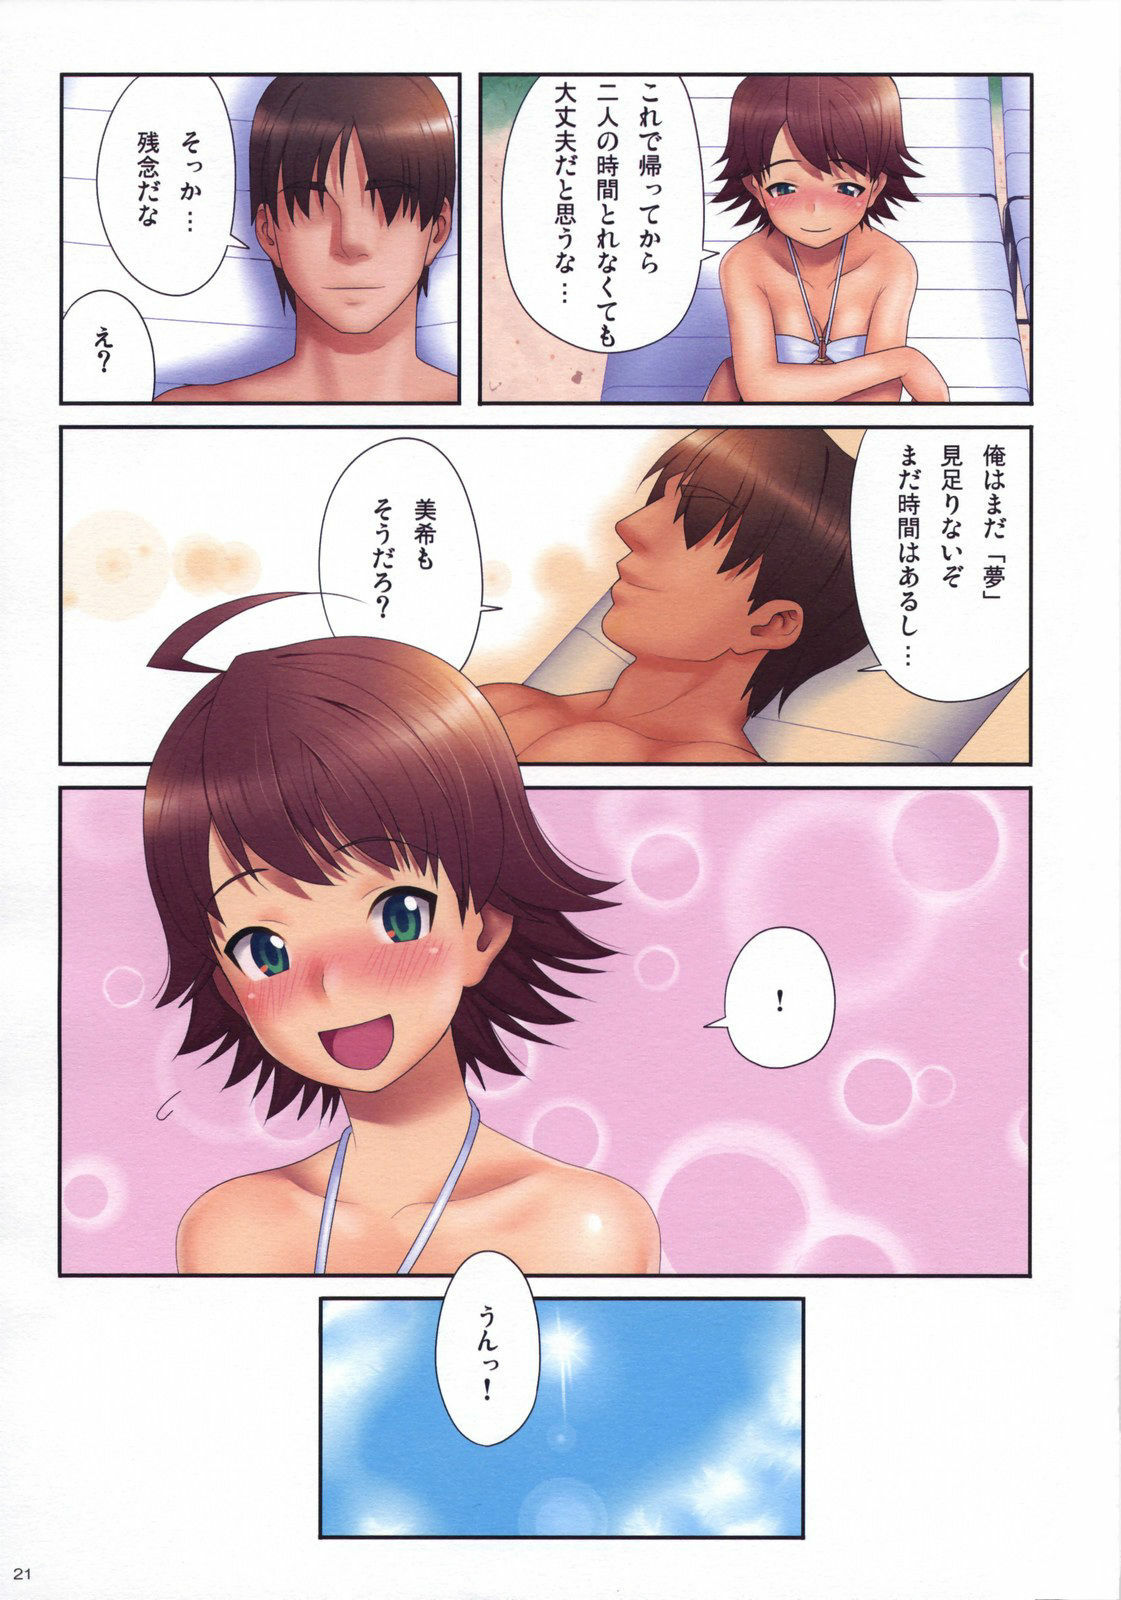 (CT12) [TNC. (Lunch)] Fourteen Plus (THE iDOLM@STER) [Decensored] page 20 full